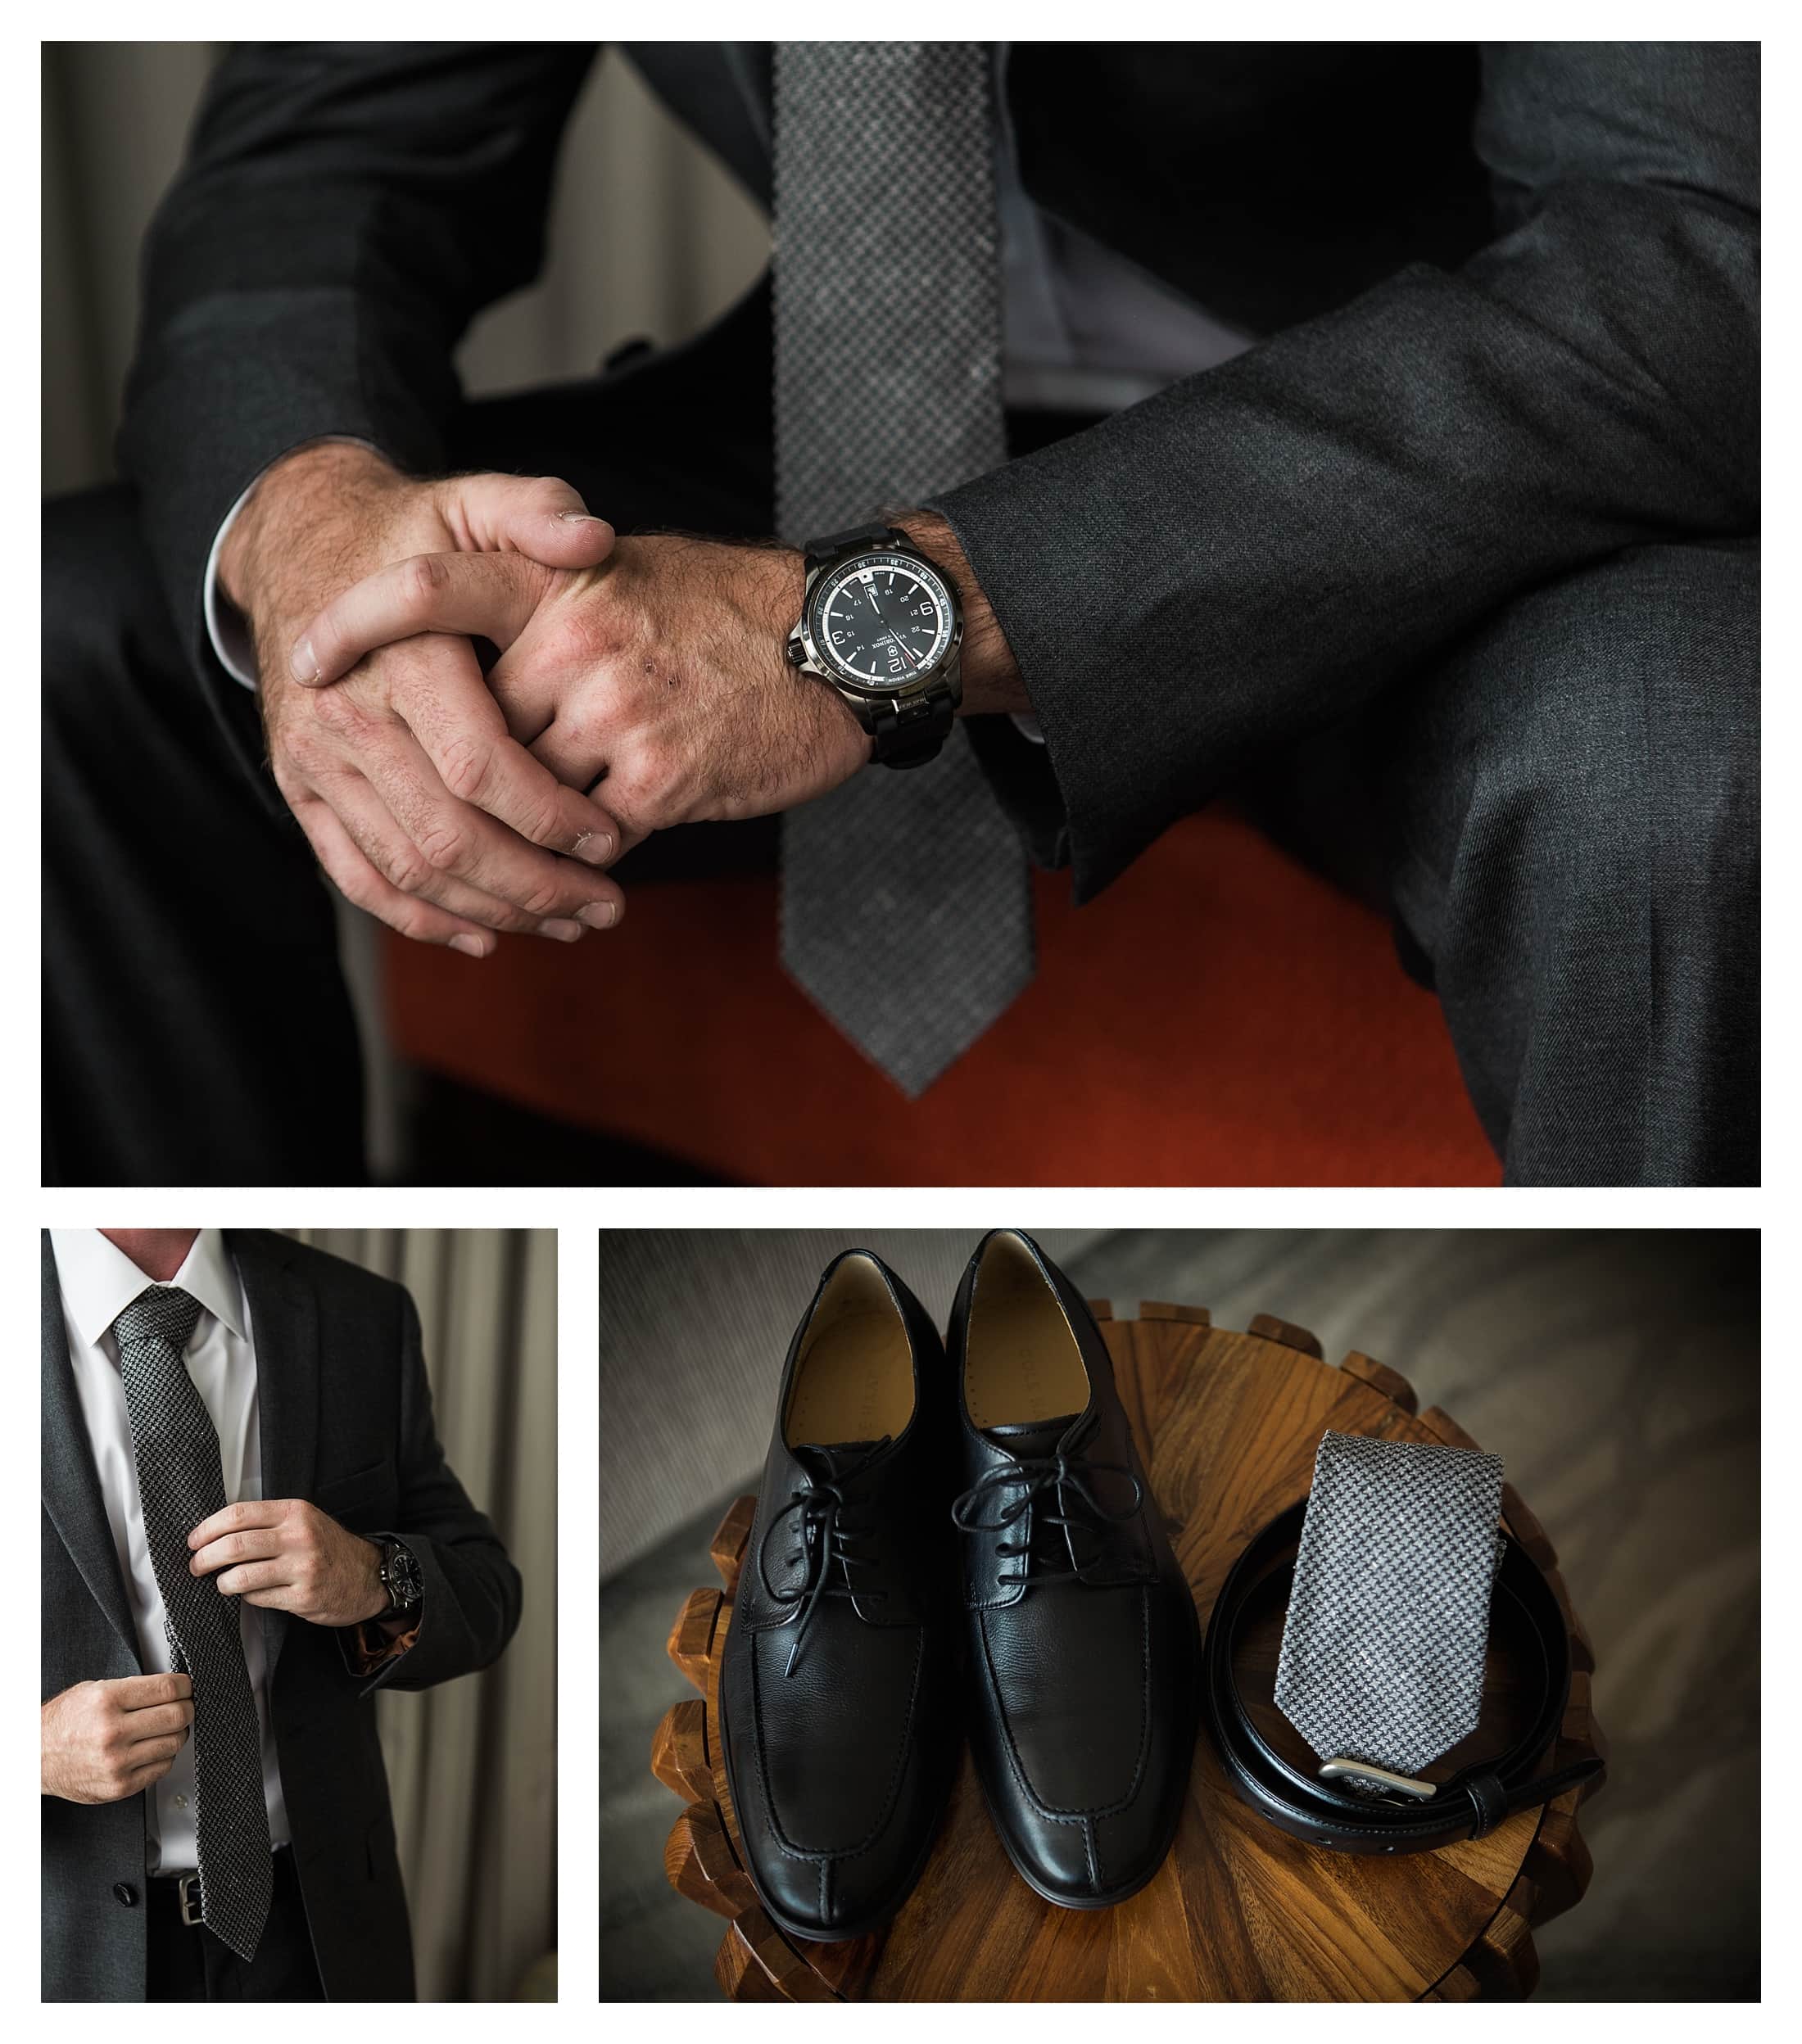 Grooms tie, shoes and watch